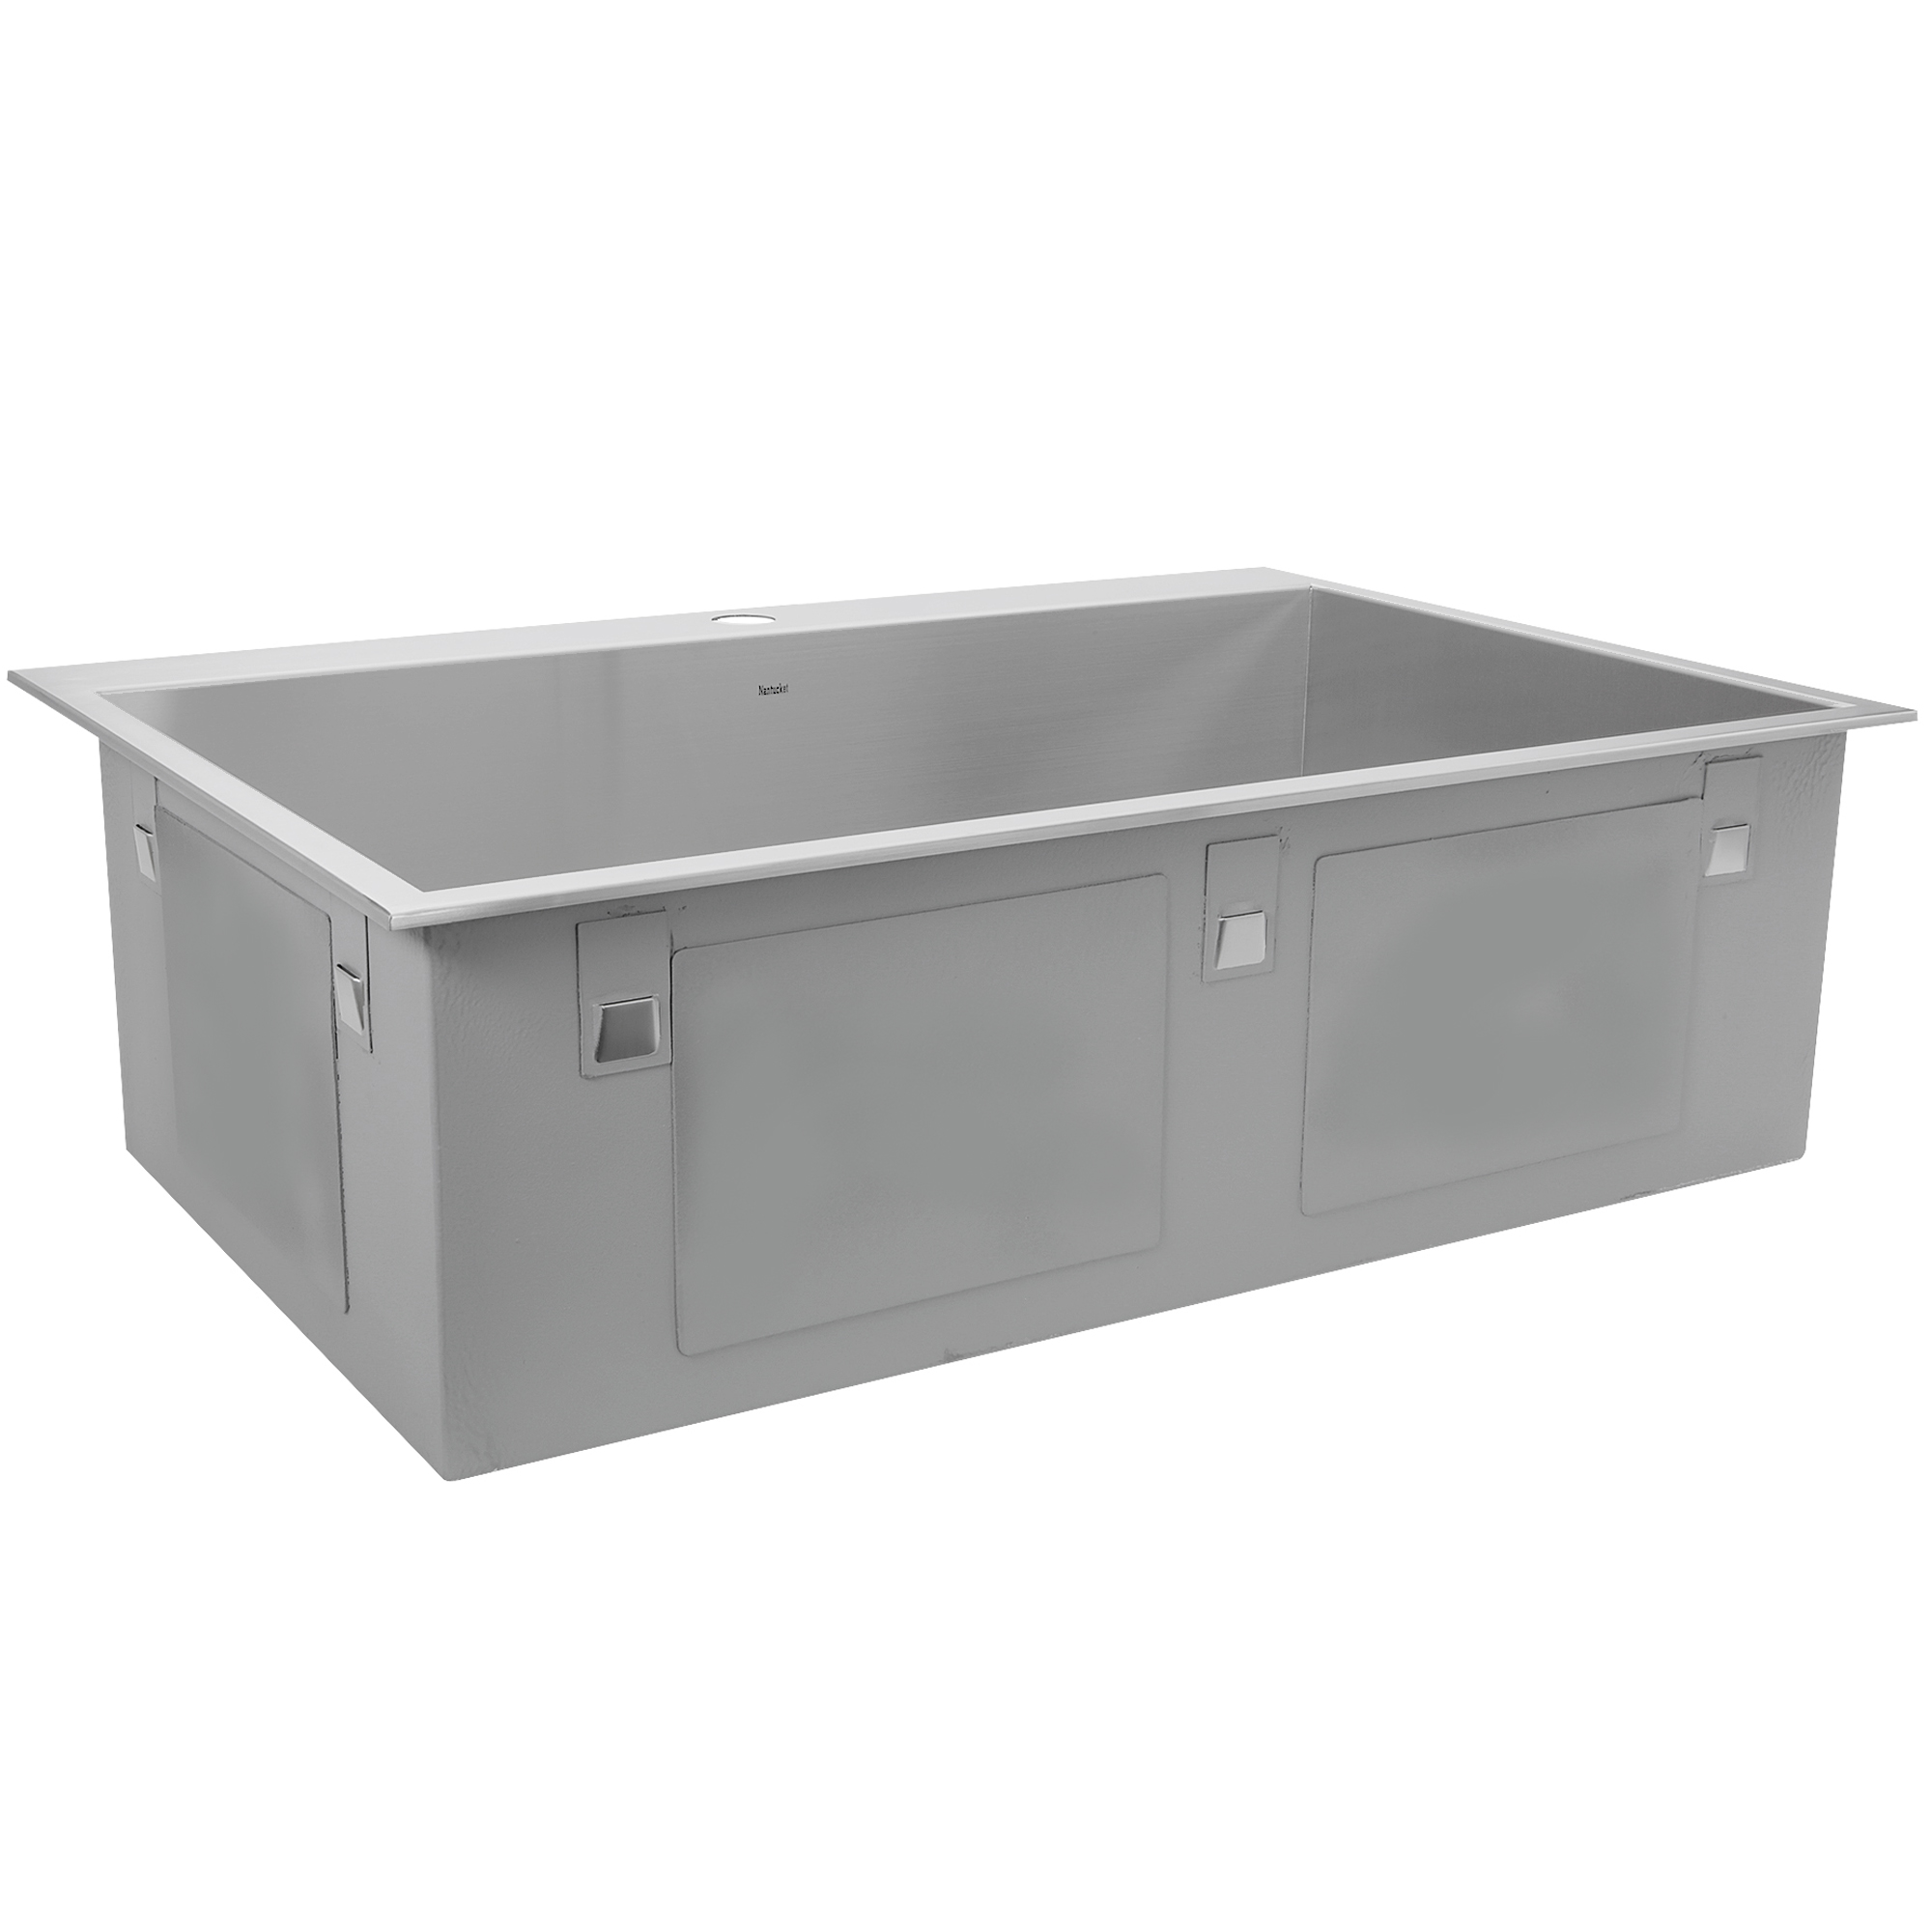 Nantucket Sinks ZR3322-S-16 Self Rimming Stainless Steel Kitchen Sink - image 3 of 7